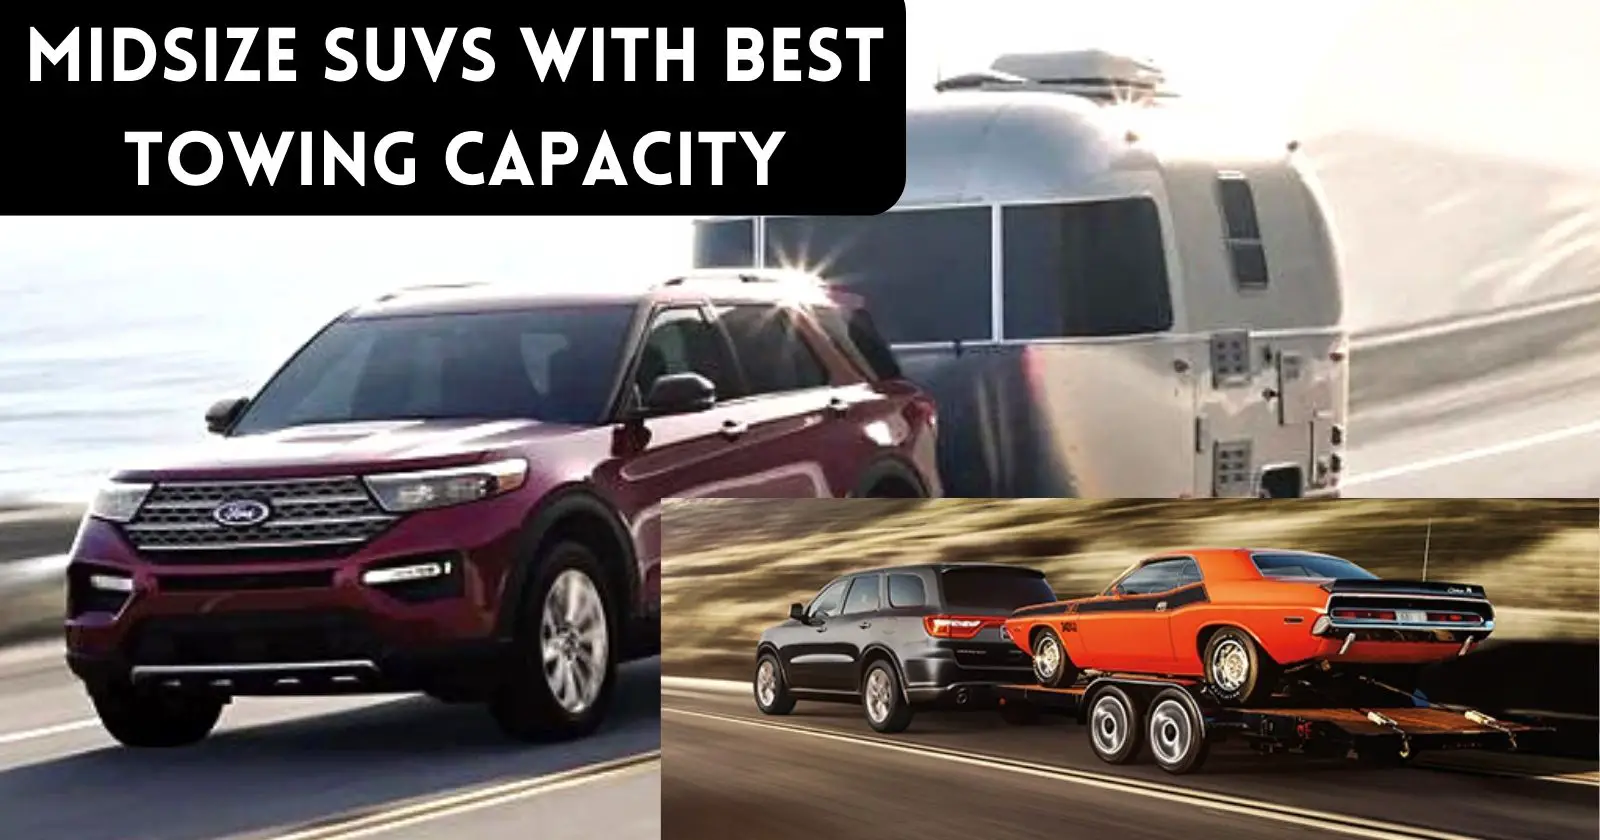 Midsize SUVs with Best Towing Capacity In US